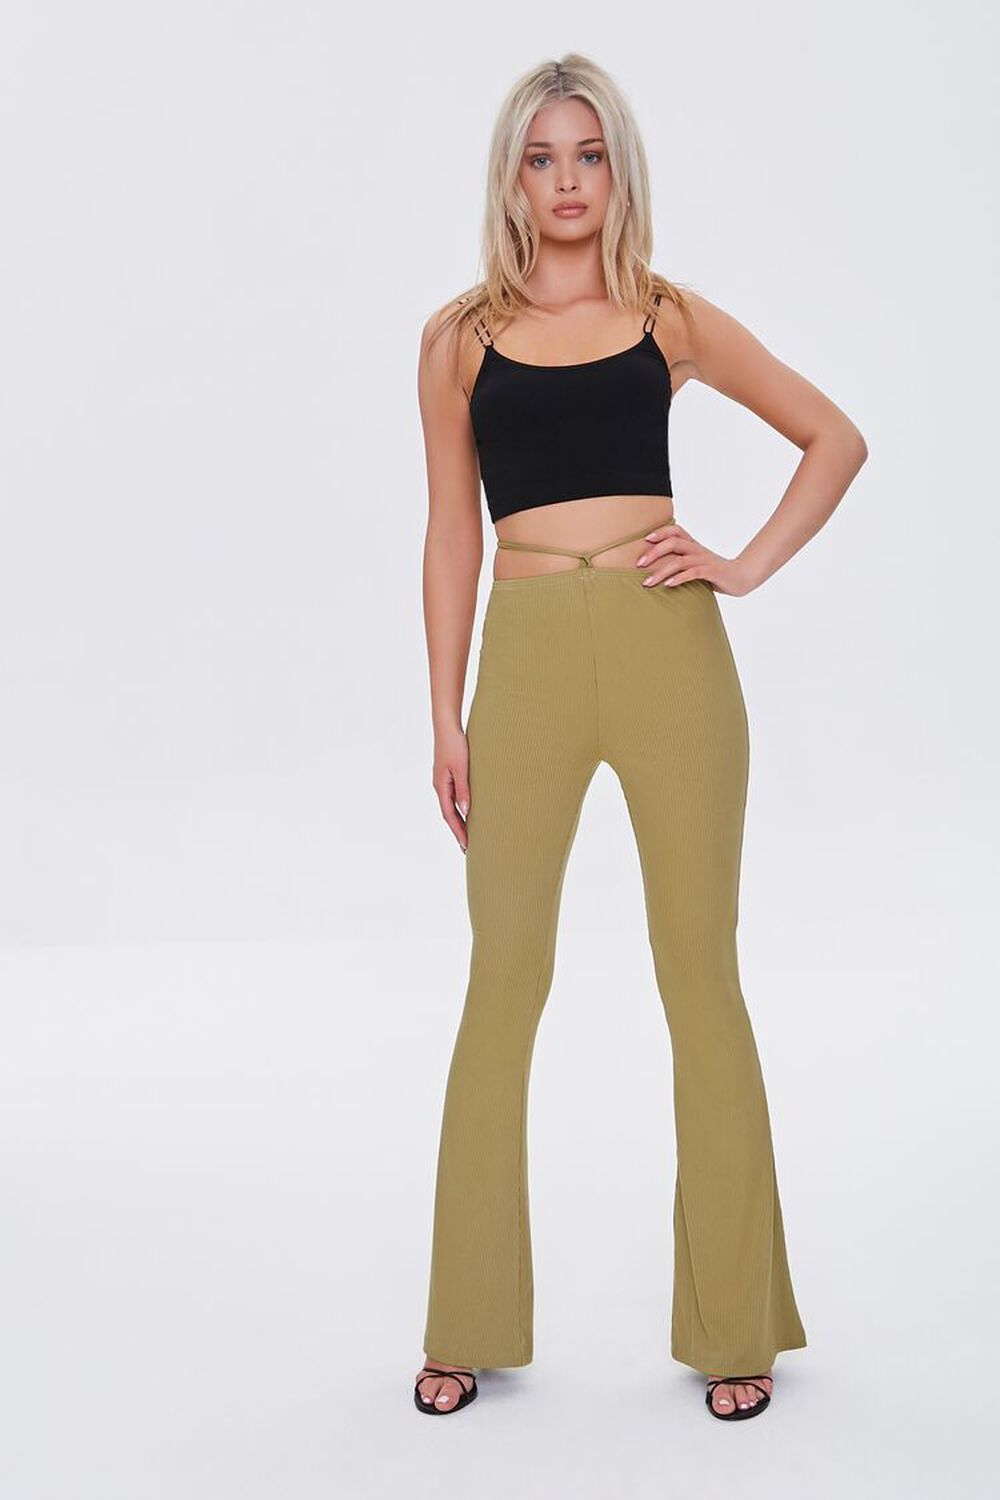 OLIVE Ribbed Knit Self-Tie Flare Pants, image 1